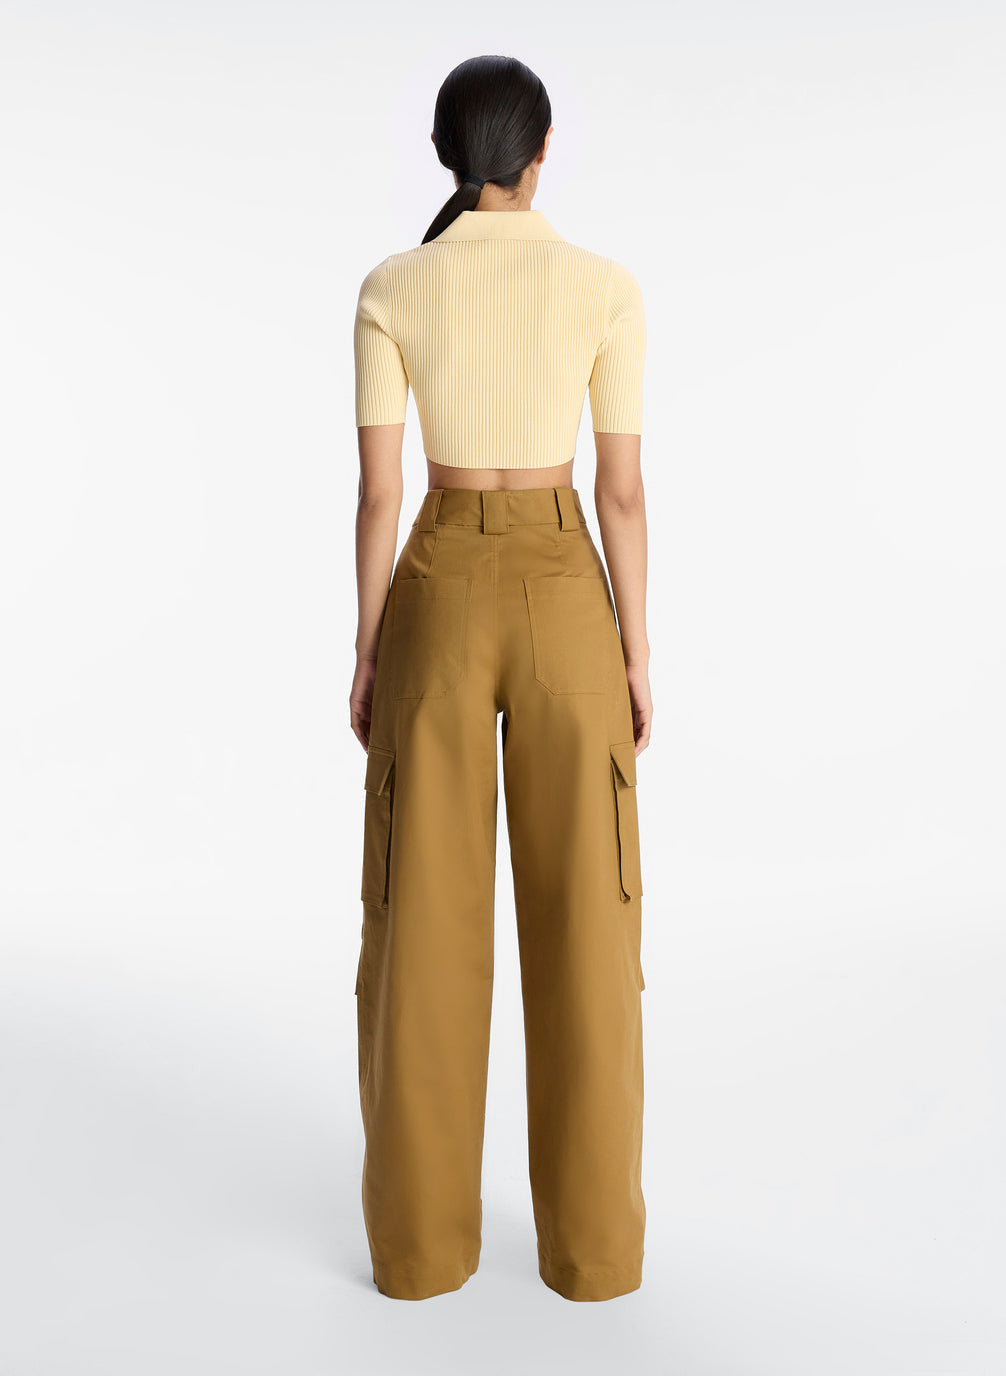 The ALC Brie Pant in dark butterscotch available at The New Trend Australia